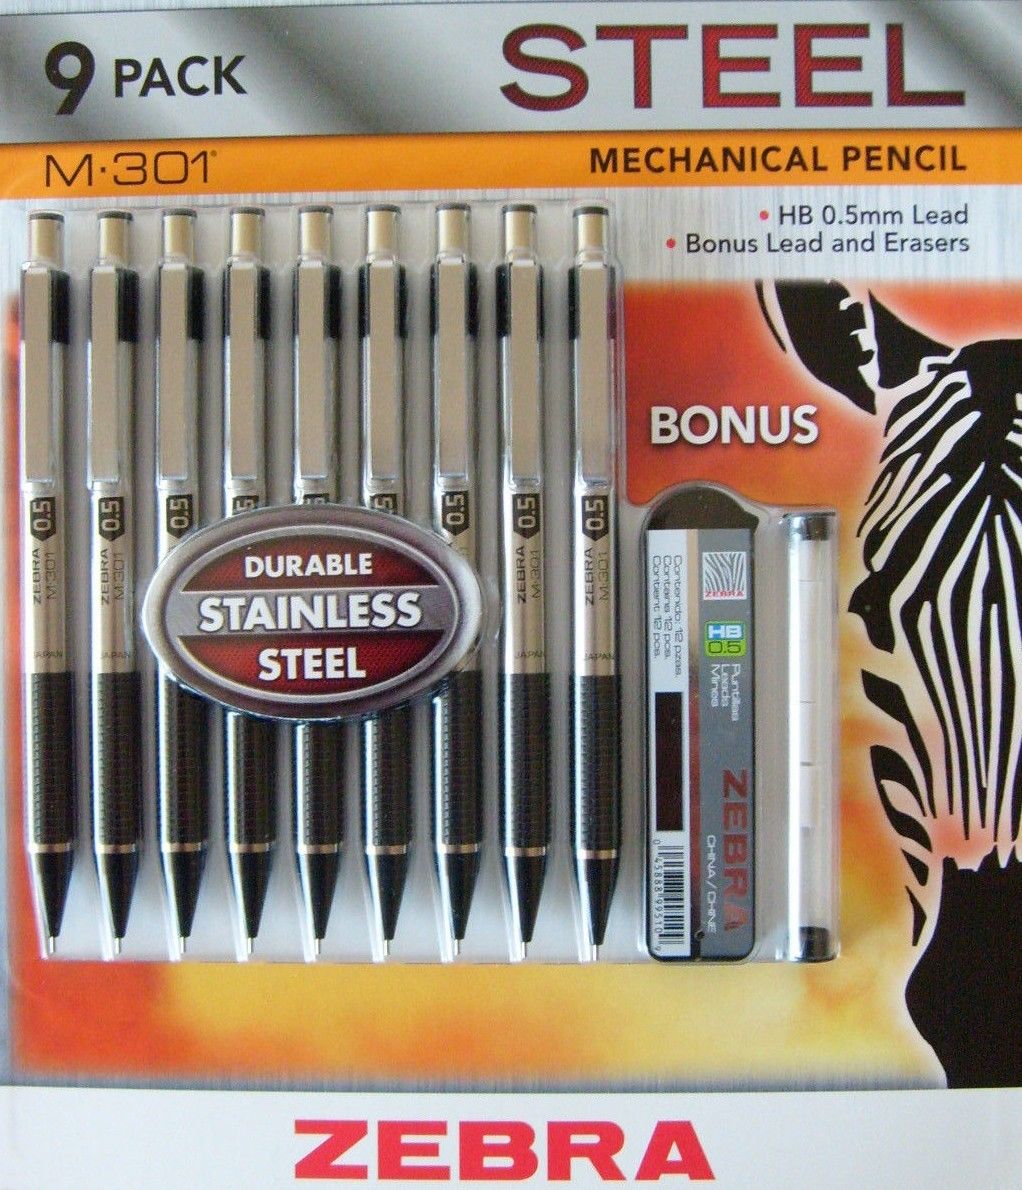 (3) New 9pk Zebra M301 Stainless Steel Mechanical Pencil -- US Delivery